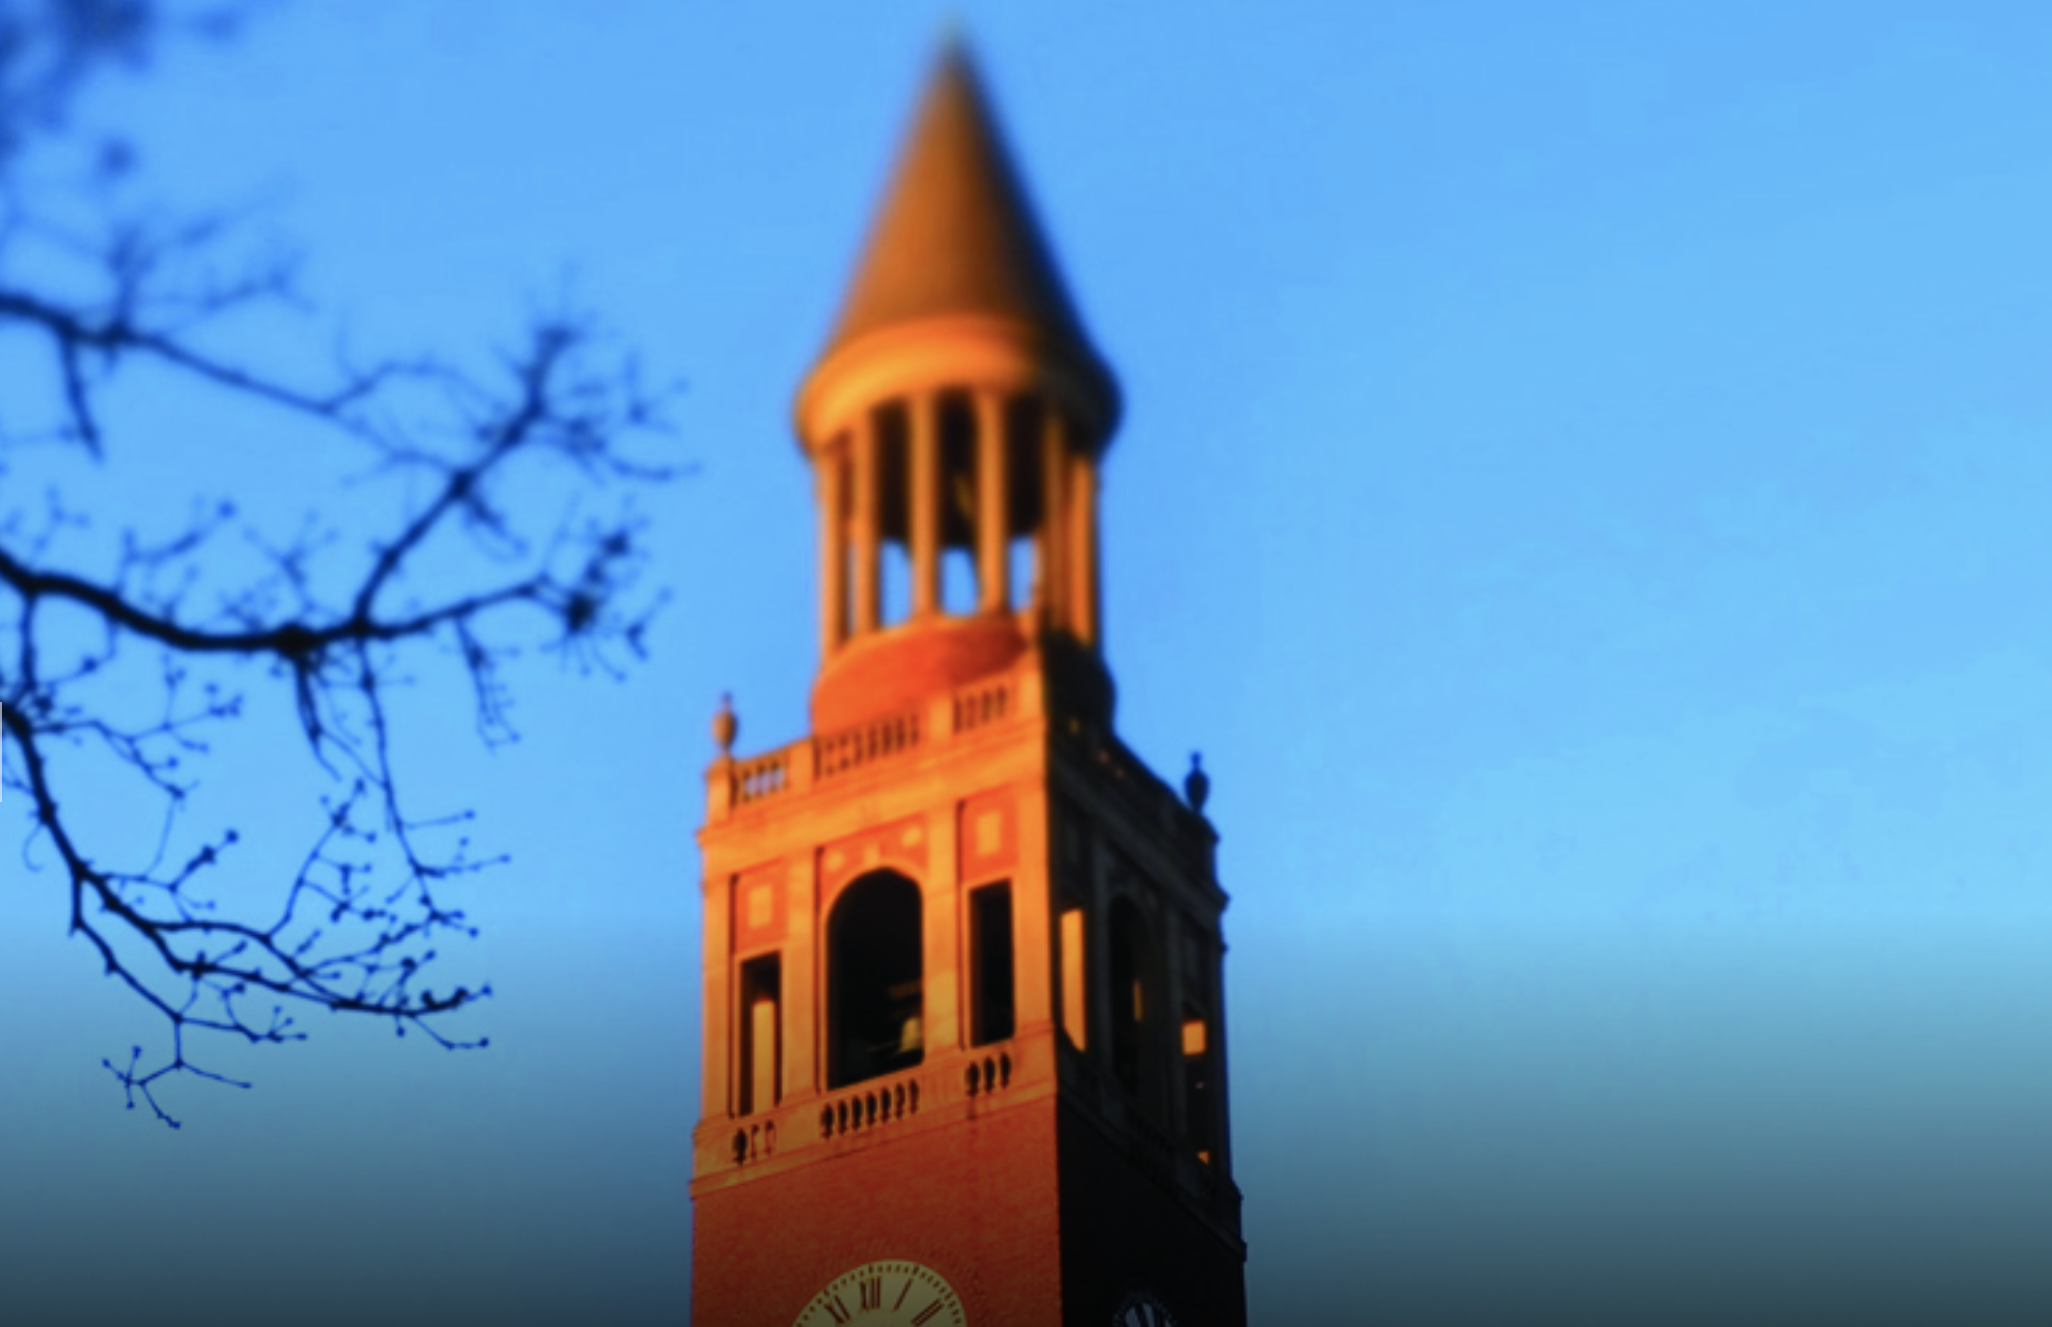 UNC Bell Tower